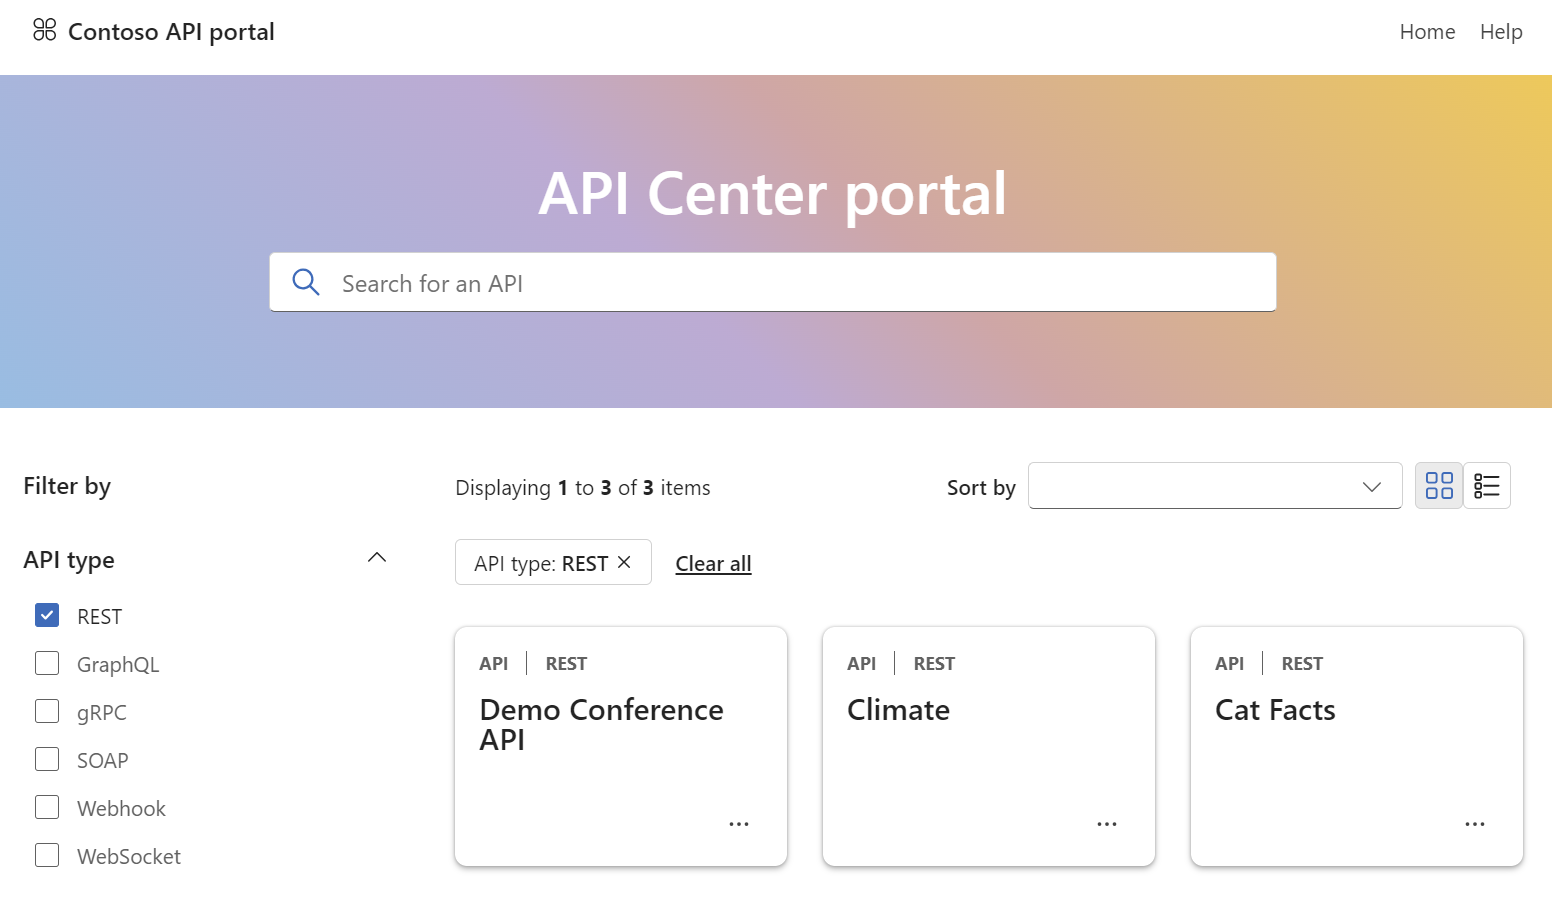 Screenshot of the API Center portal after user sign-in.